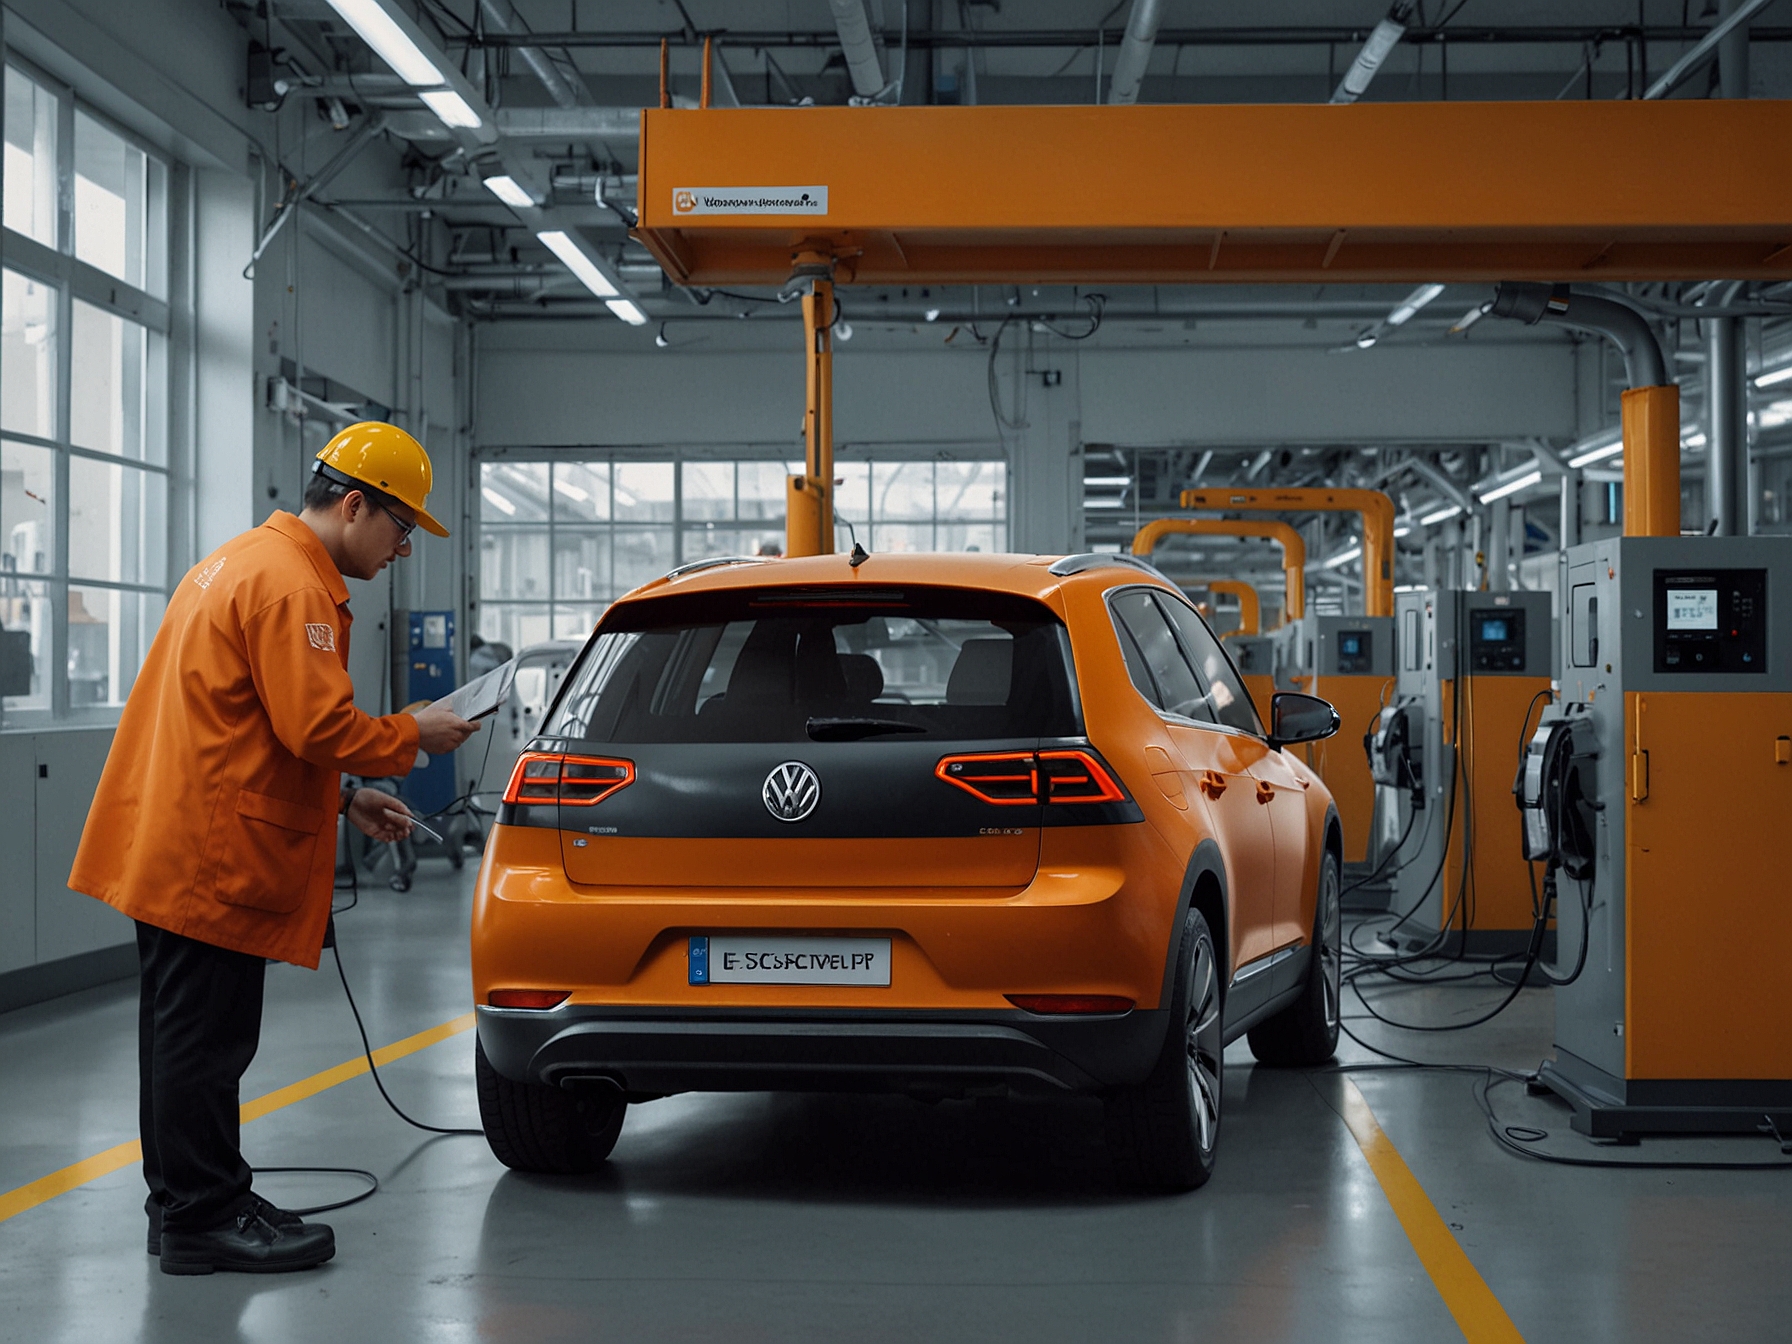 A visual representation of Volkswagen's workforce undergoing retraining programs for electric vehicle production, depicting the internal cultural shift and adaptation to new EV skills and processes.